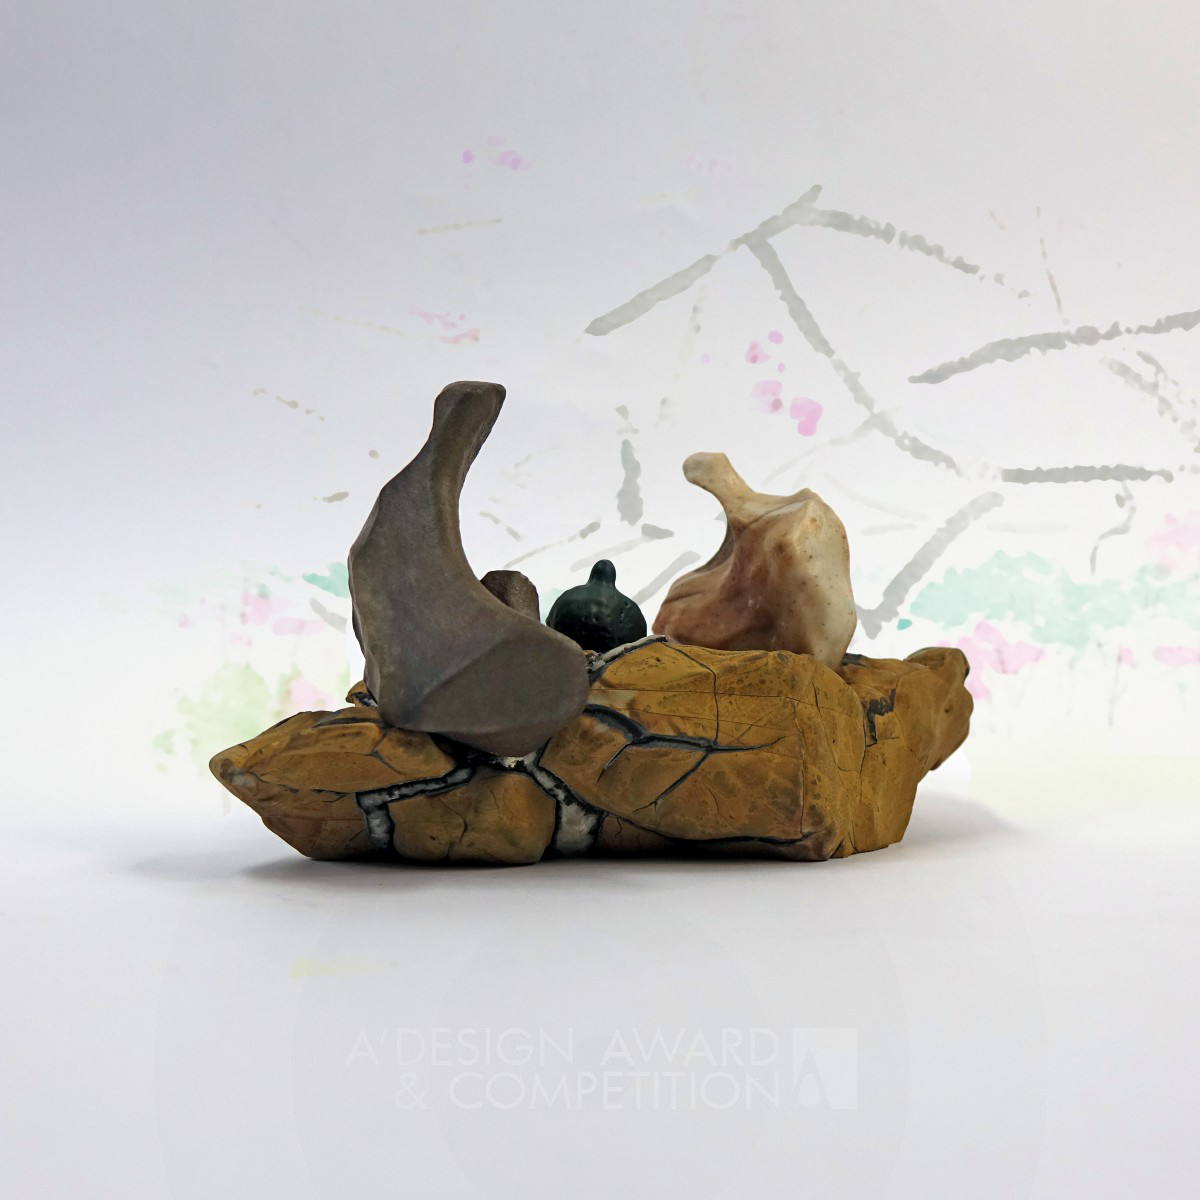 Conversations stone scenes by Naai-Jung Shih